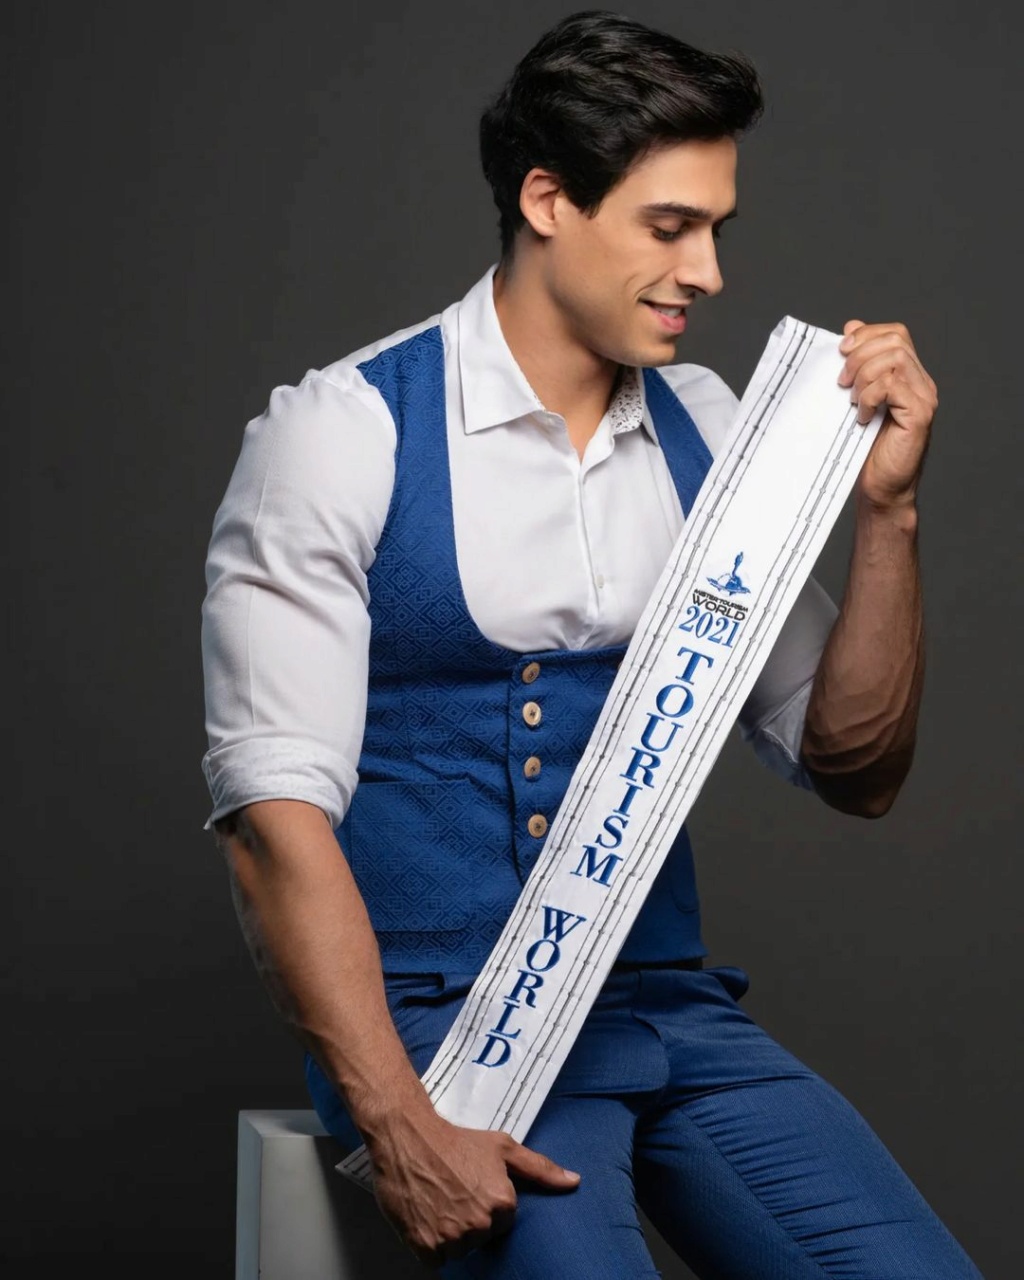 Official Thread of Mister Tourism World 2020/2021 is Jonathan Checo of Dominican Republic 27206611